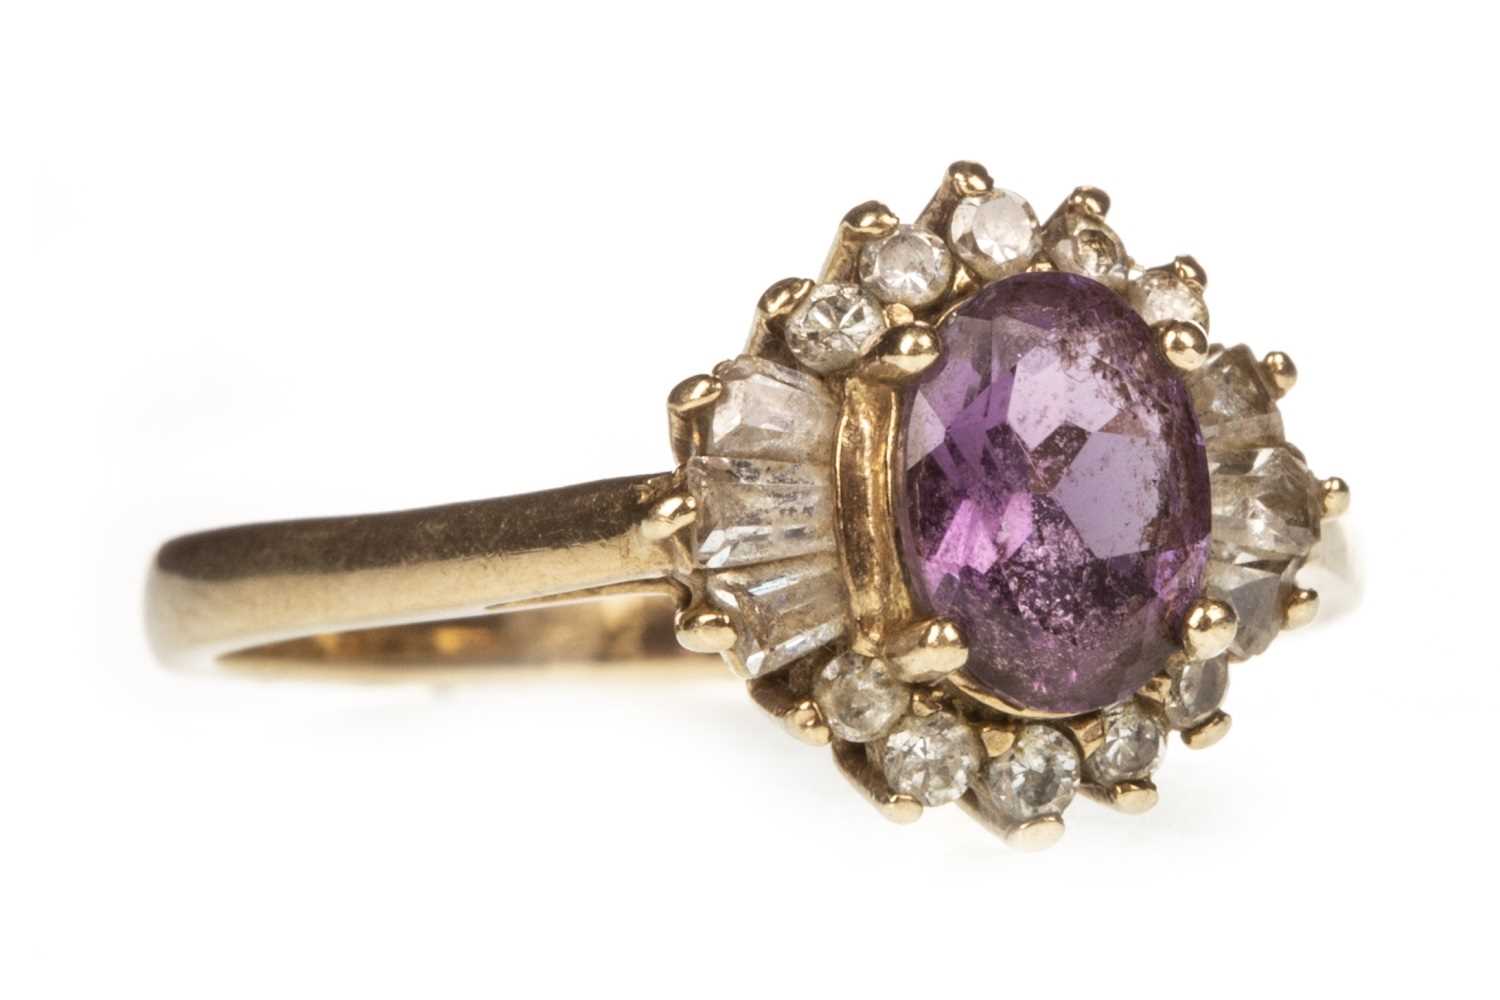 Lot 100 - A PURPLE AND WHITE GEM SET RING